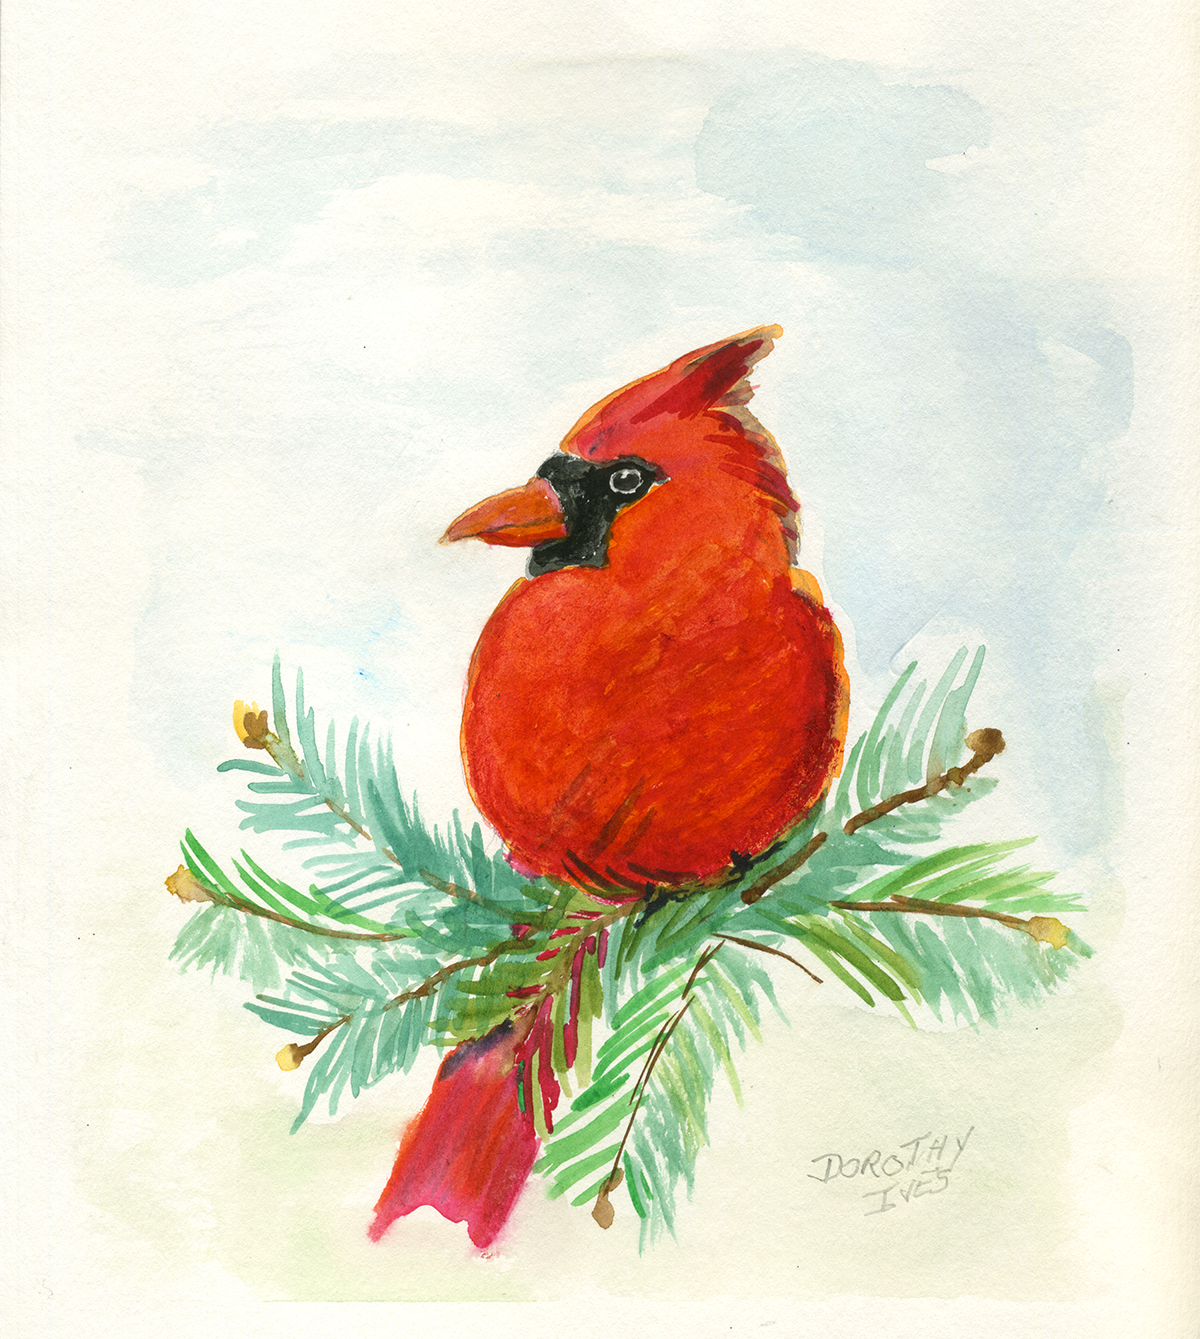 Cardinal artwork created by Dorothy Ives of New Perspective Senior Living, Waconia, Minn. will be featured in Christmas cards for the residences' 21 communities throughout the Midwest.